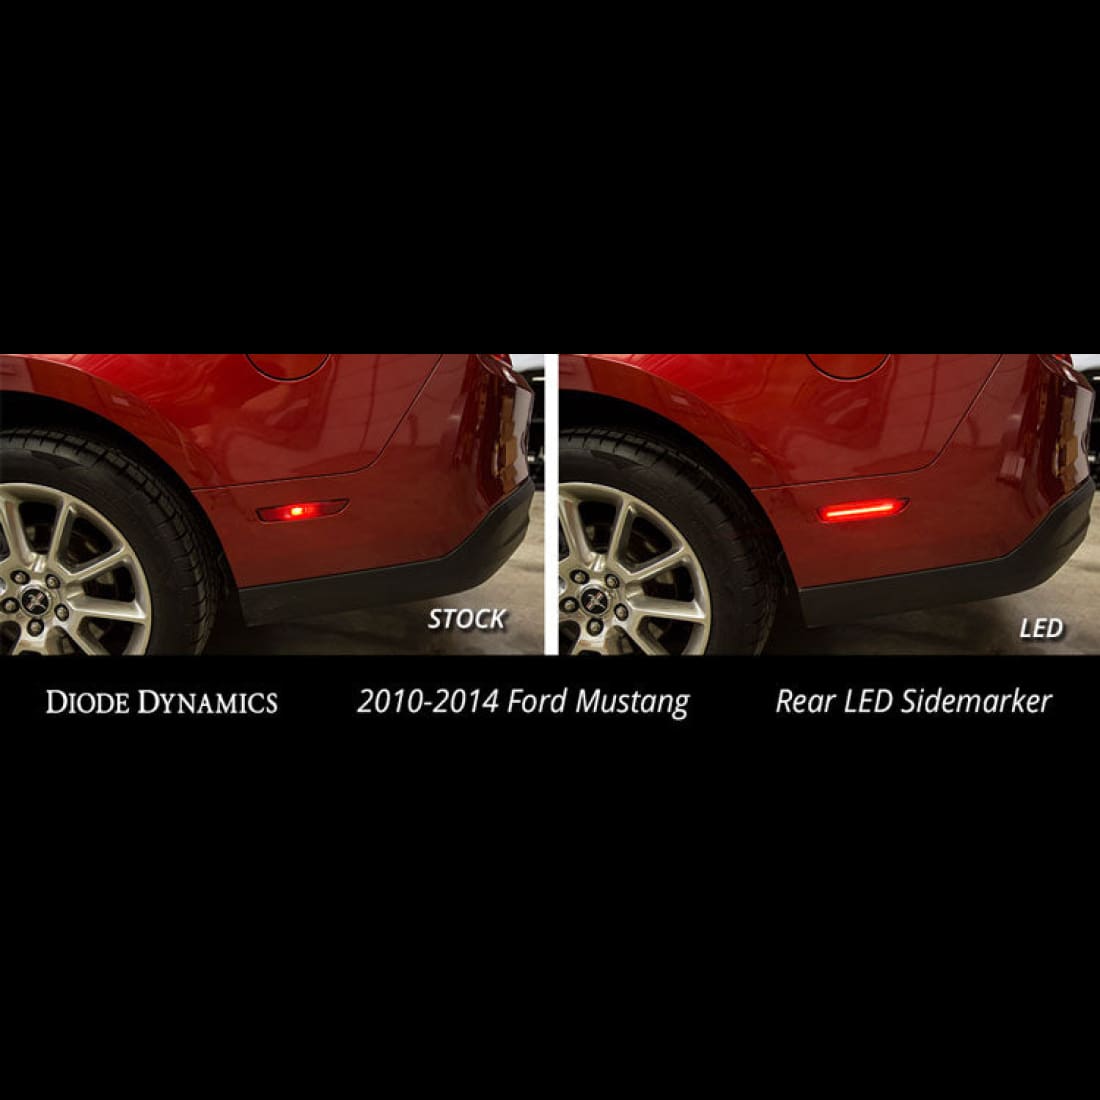 2010-2014 Mustang Diode Dynamics LED Sidemarkers